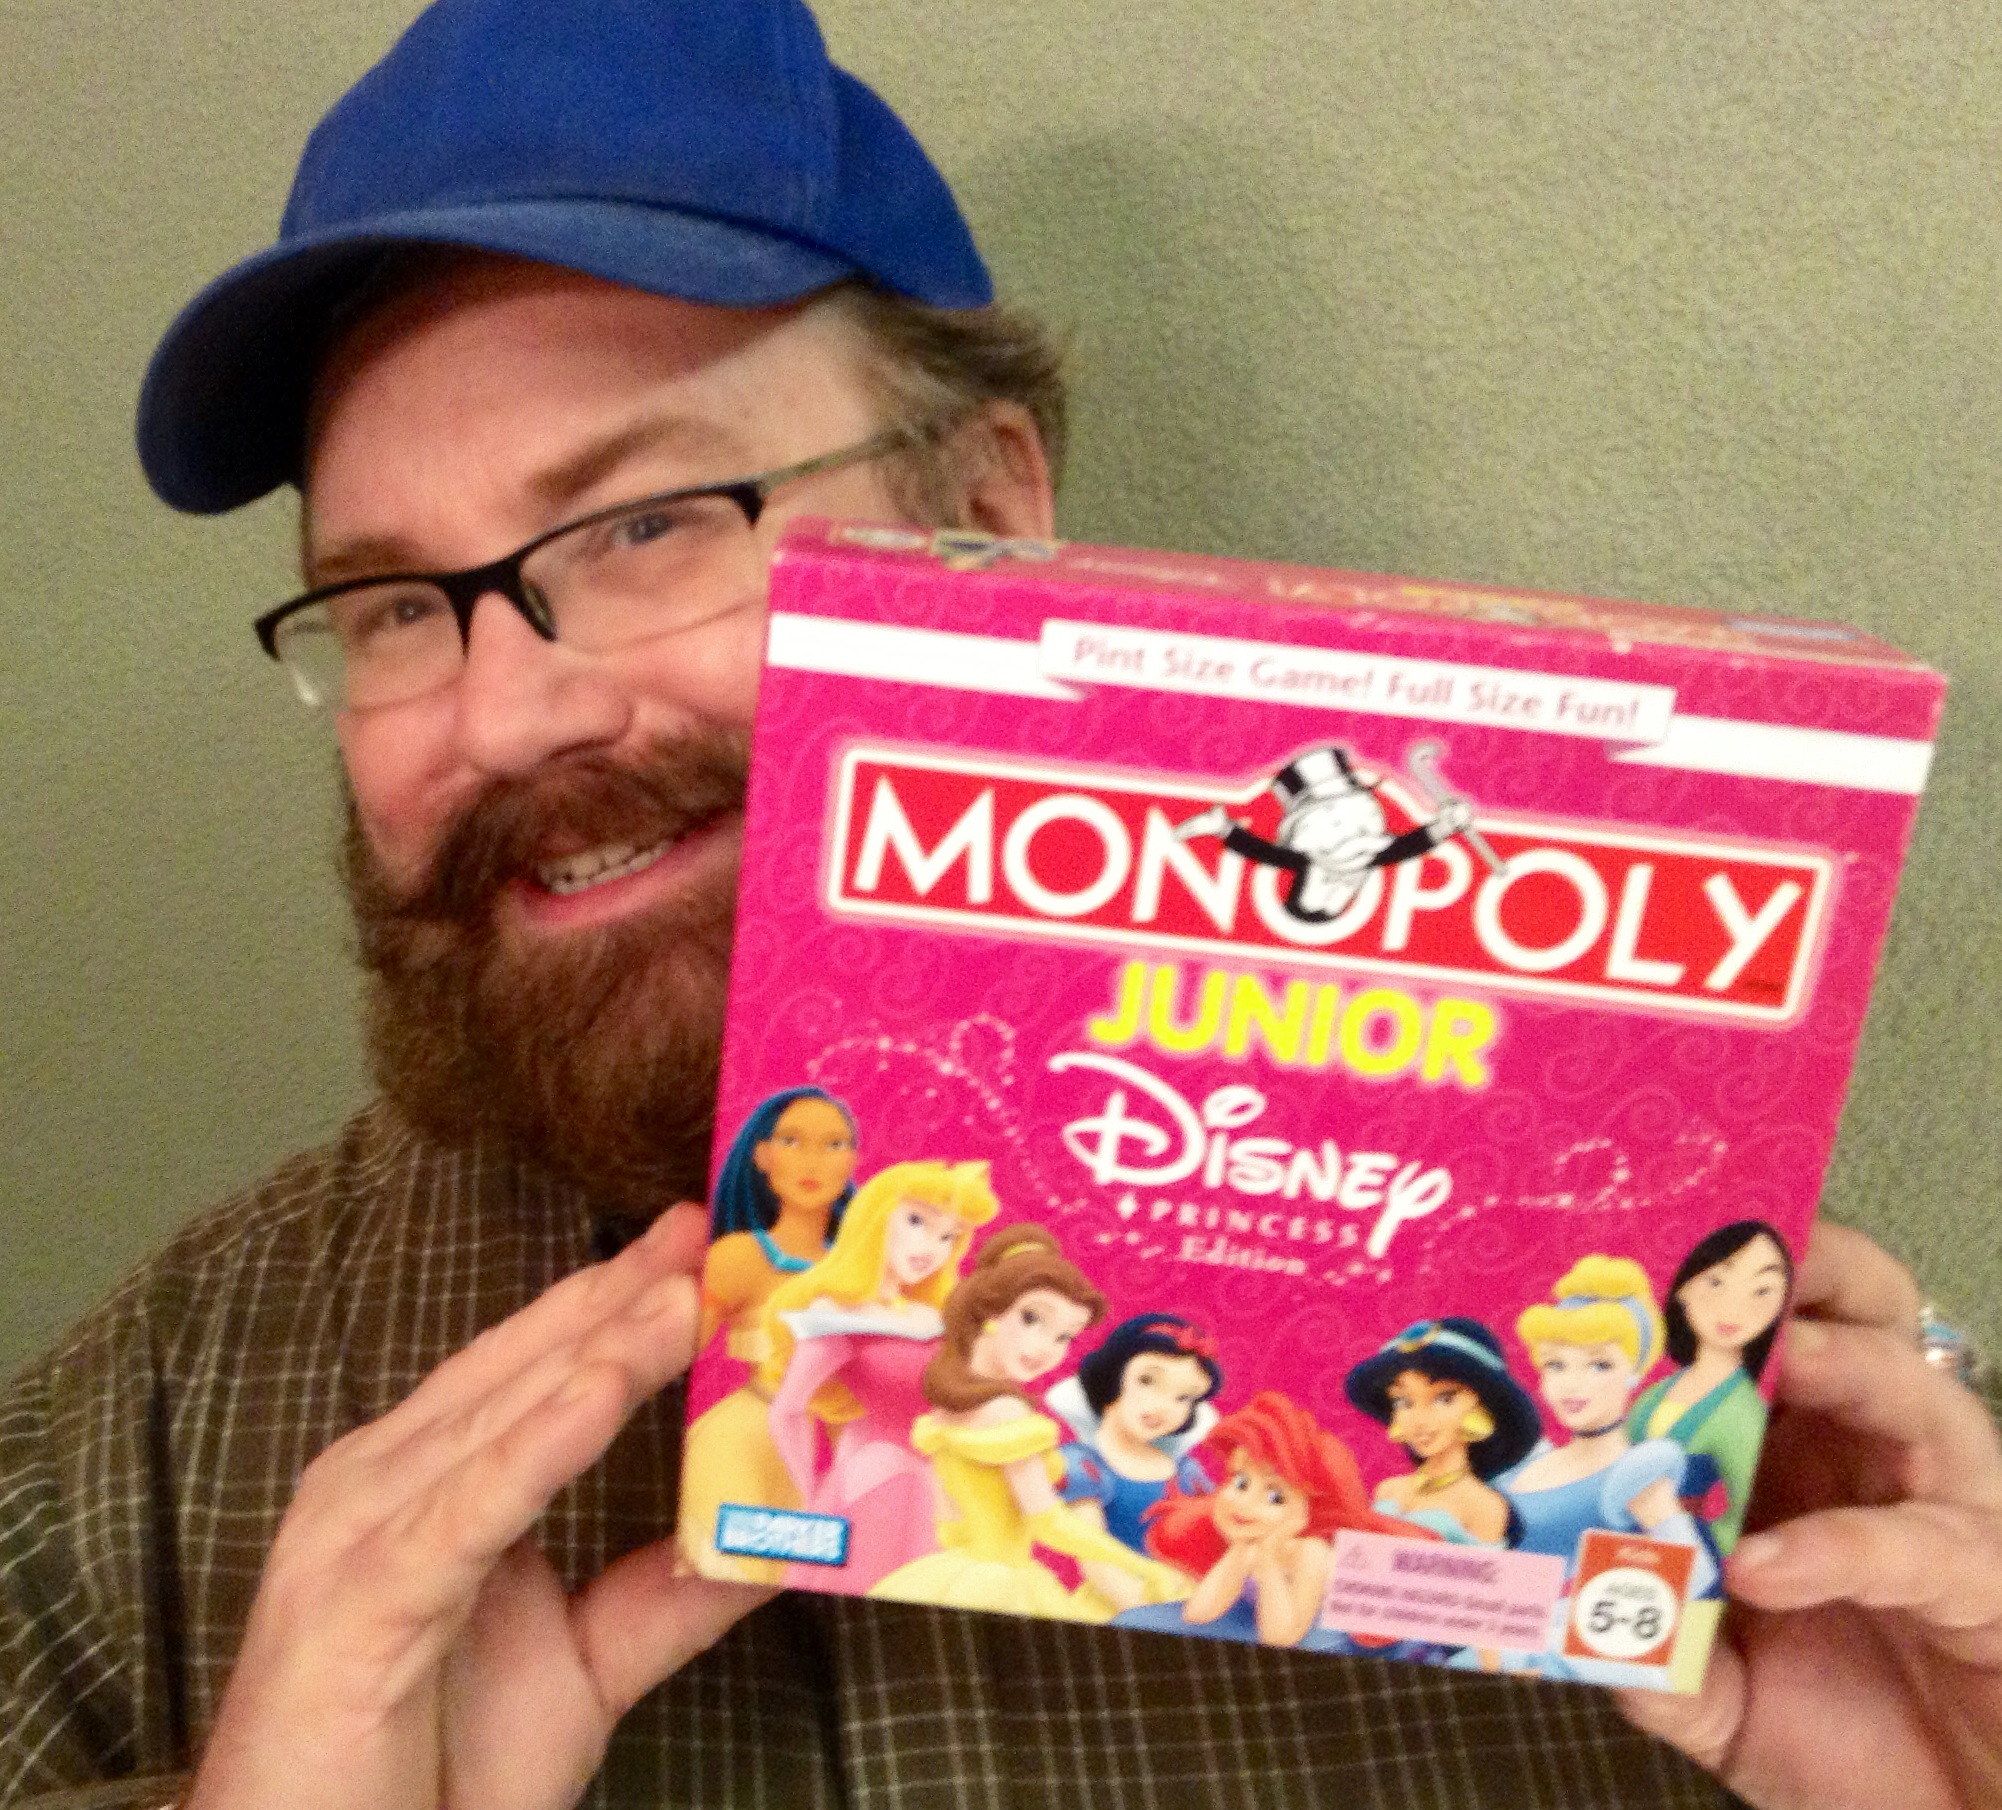 a man with a beard holding a box of monopoly for s